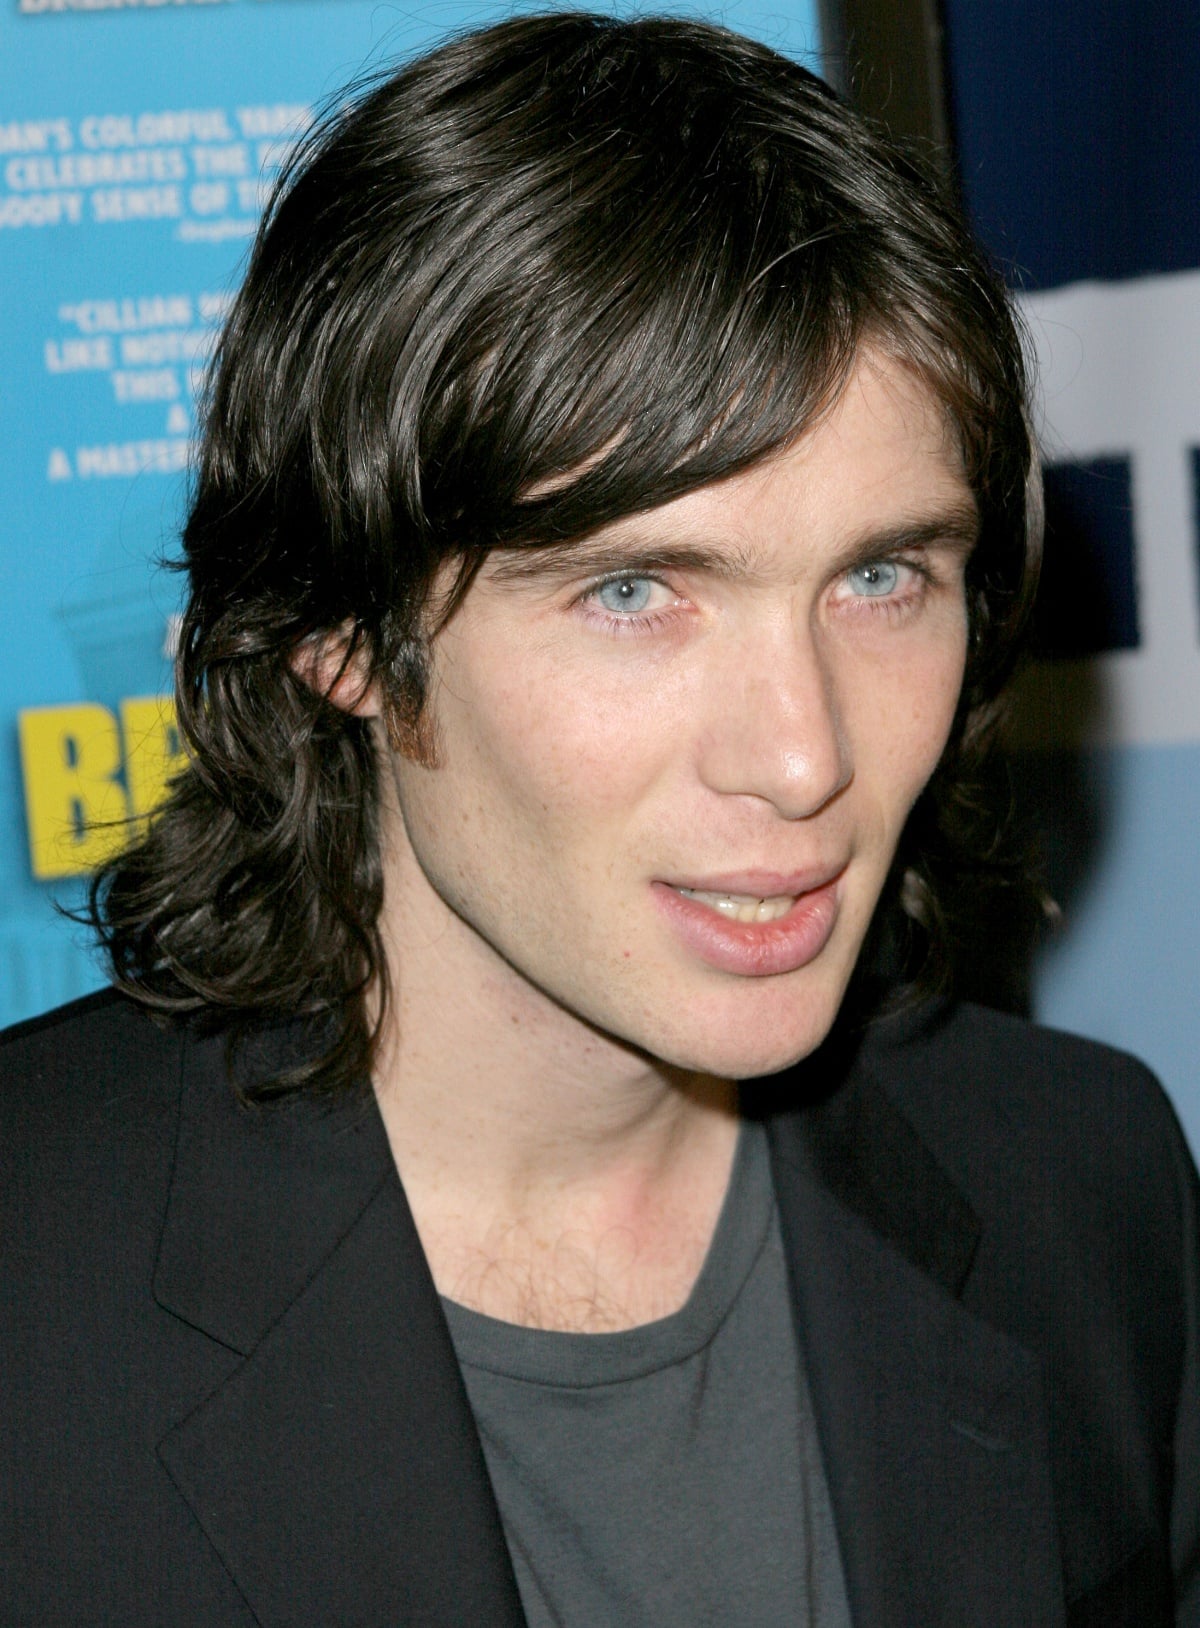 Cillian Murphy at the premiere of Breakfast on Pluto during the AFI Fest 2005